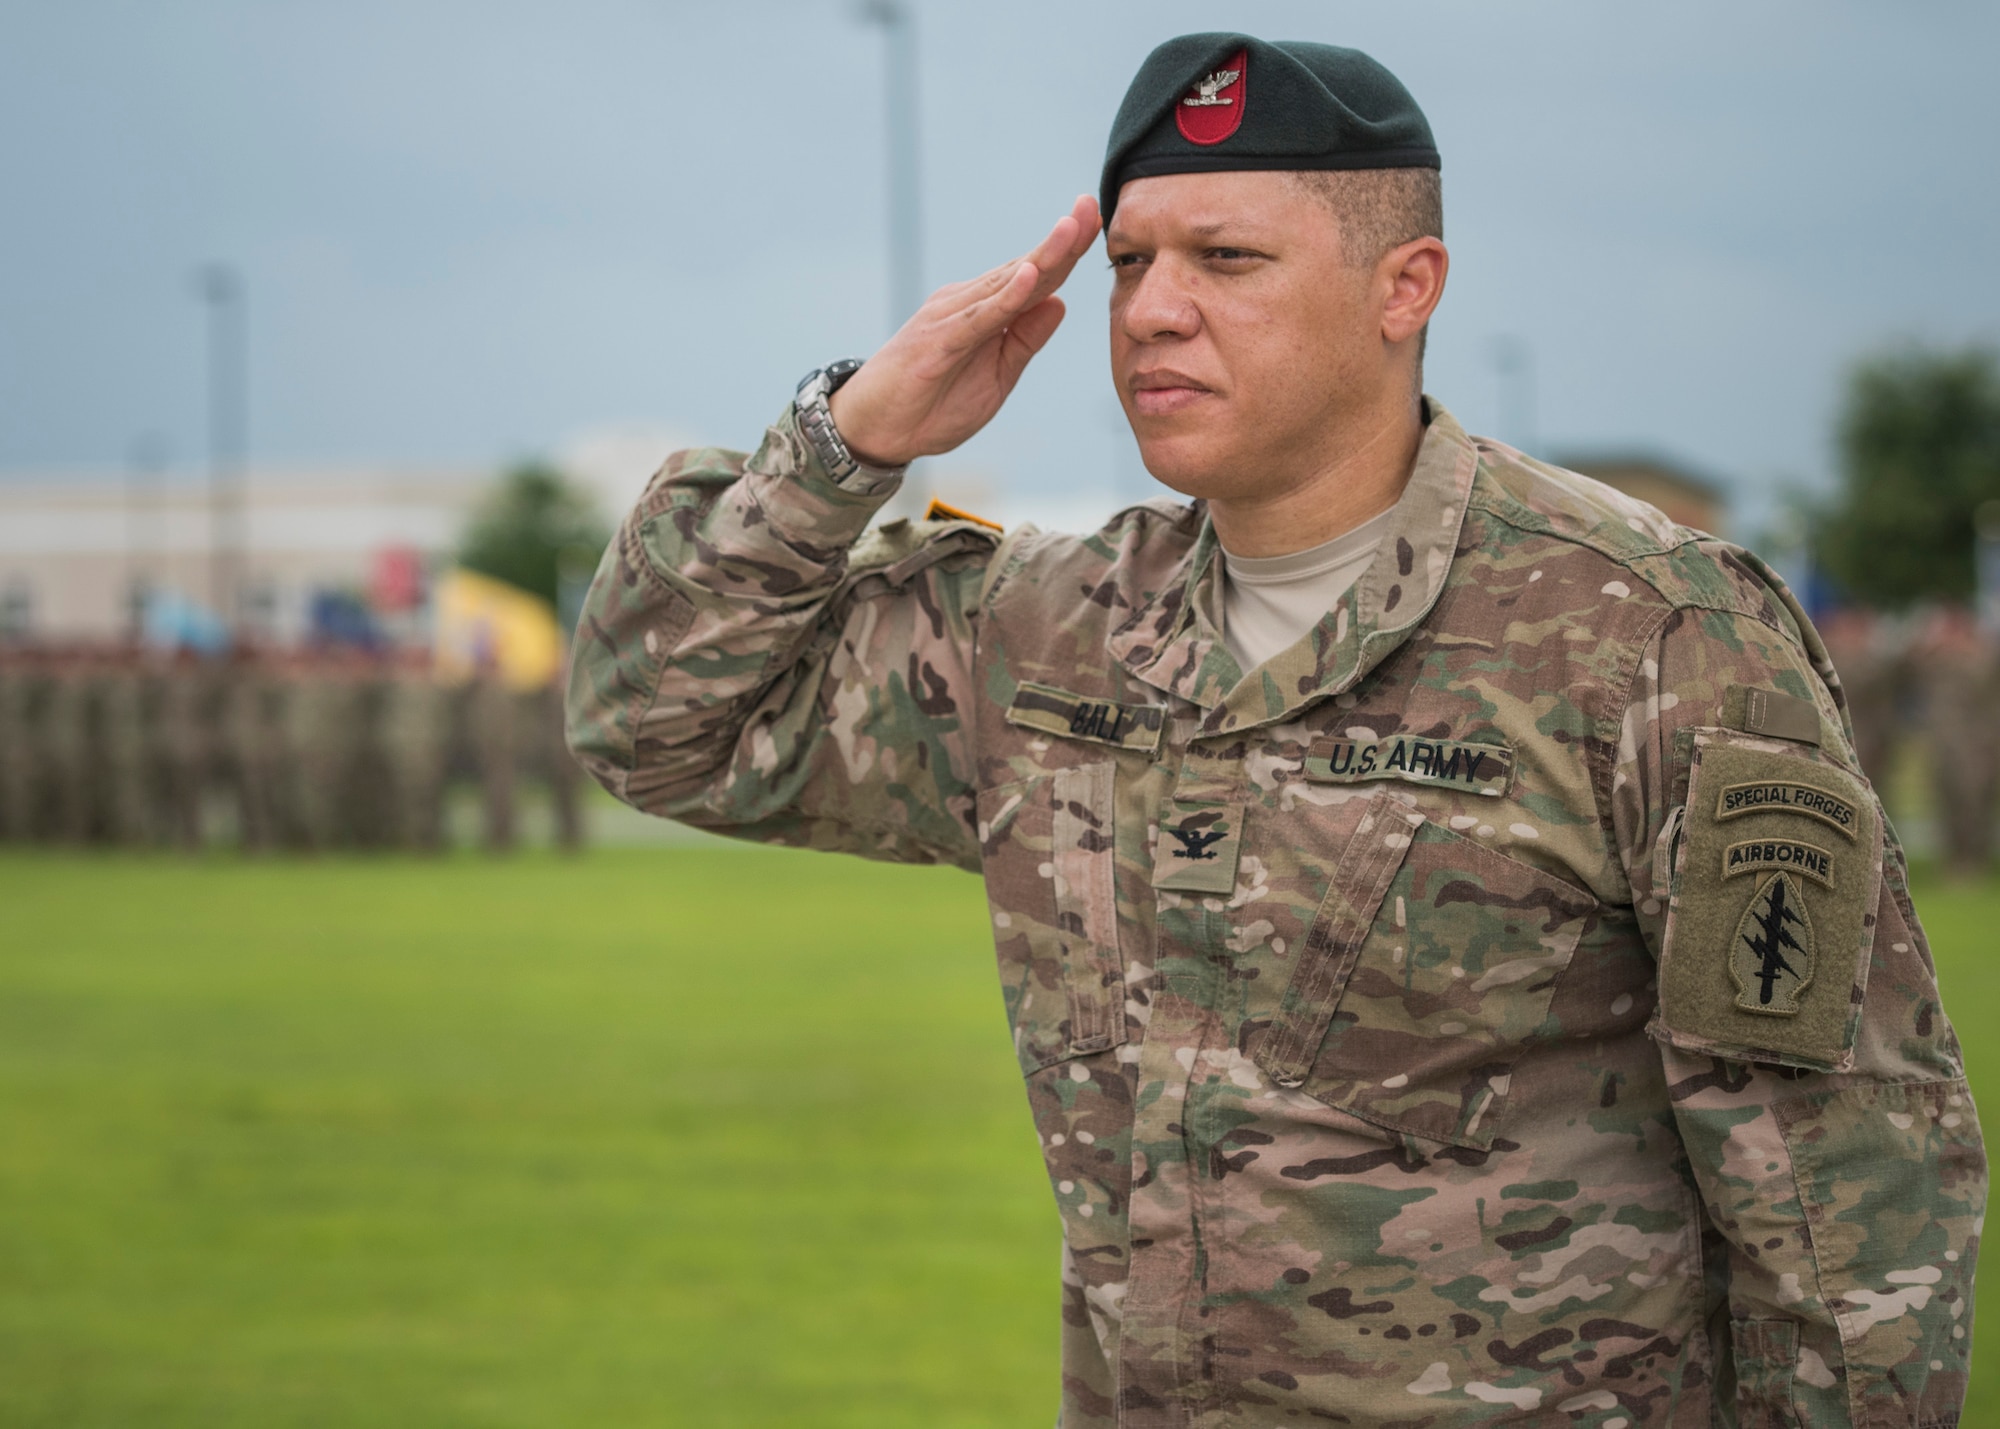 U.S. Army Col. Michael Ball, 7th Special Forces Group (Airborne) outgoing commander, salutes during a change of command ceremony June 15 at Eglin Air Force Base, Fla. During the ceremony Col. Michael Ball relinquished command of the 7th SFG(A) to Col. Patrick Colloton. Colloton previously served as the 7th SFG(A) 1st Battalion commander. (U.S. Air Force photo/Ilka Cole) 